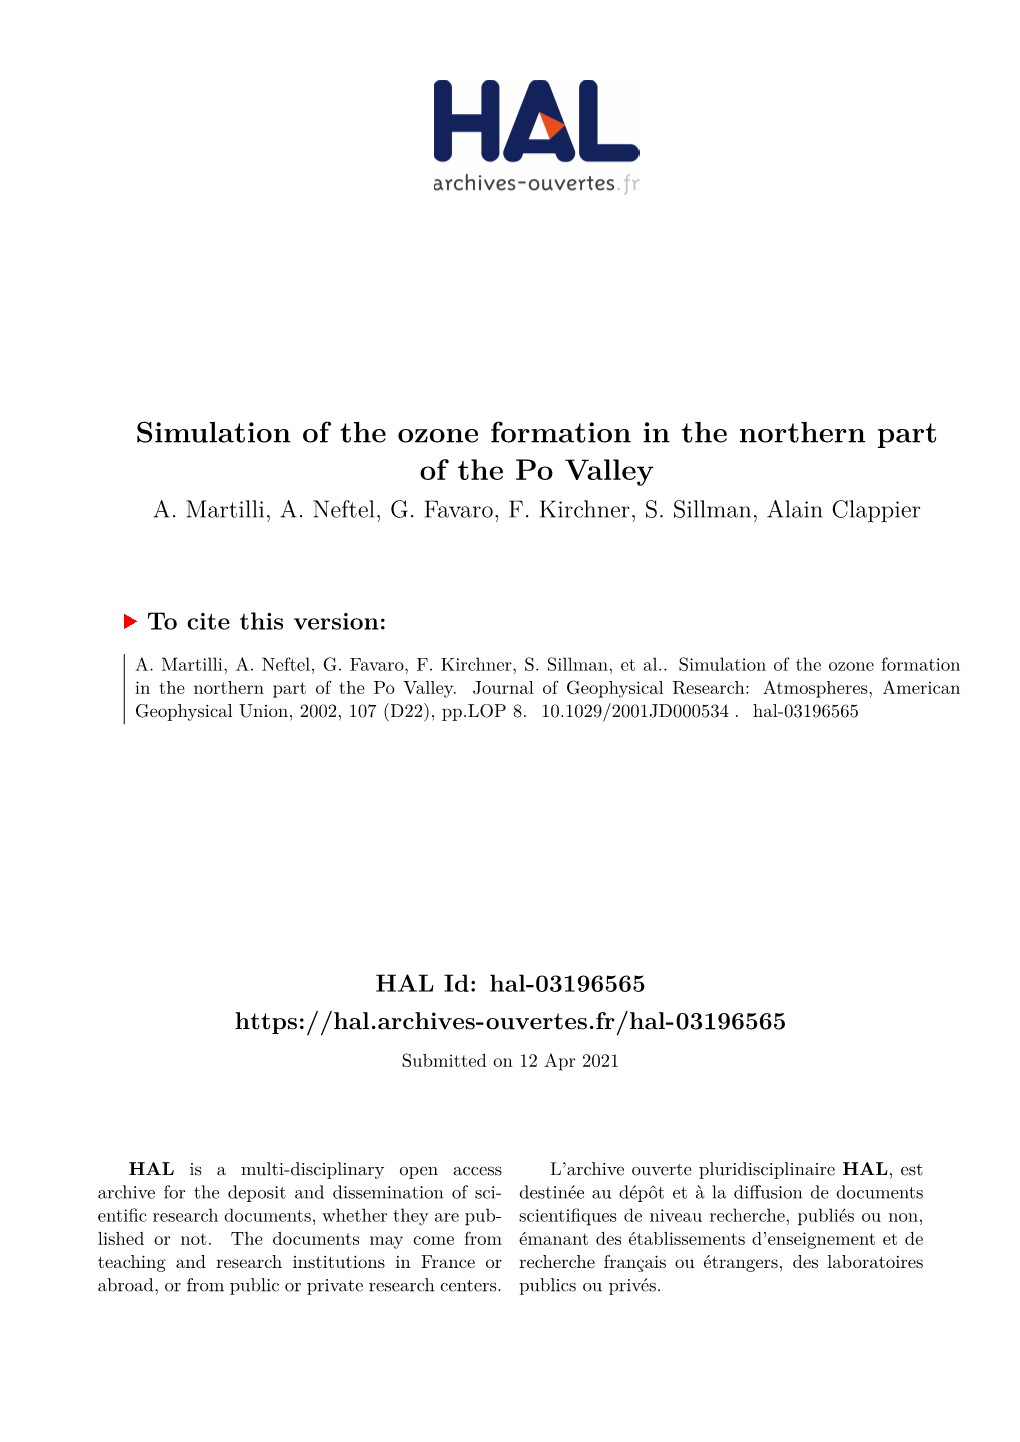 Simulation of the Ozone Formation in the Northern Part of the Po Valley A